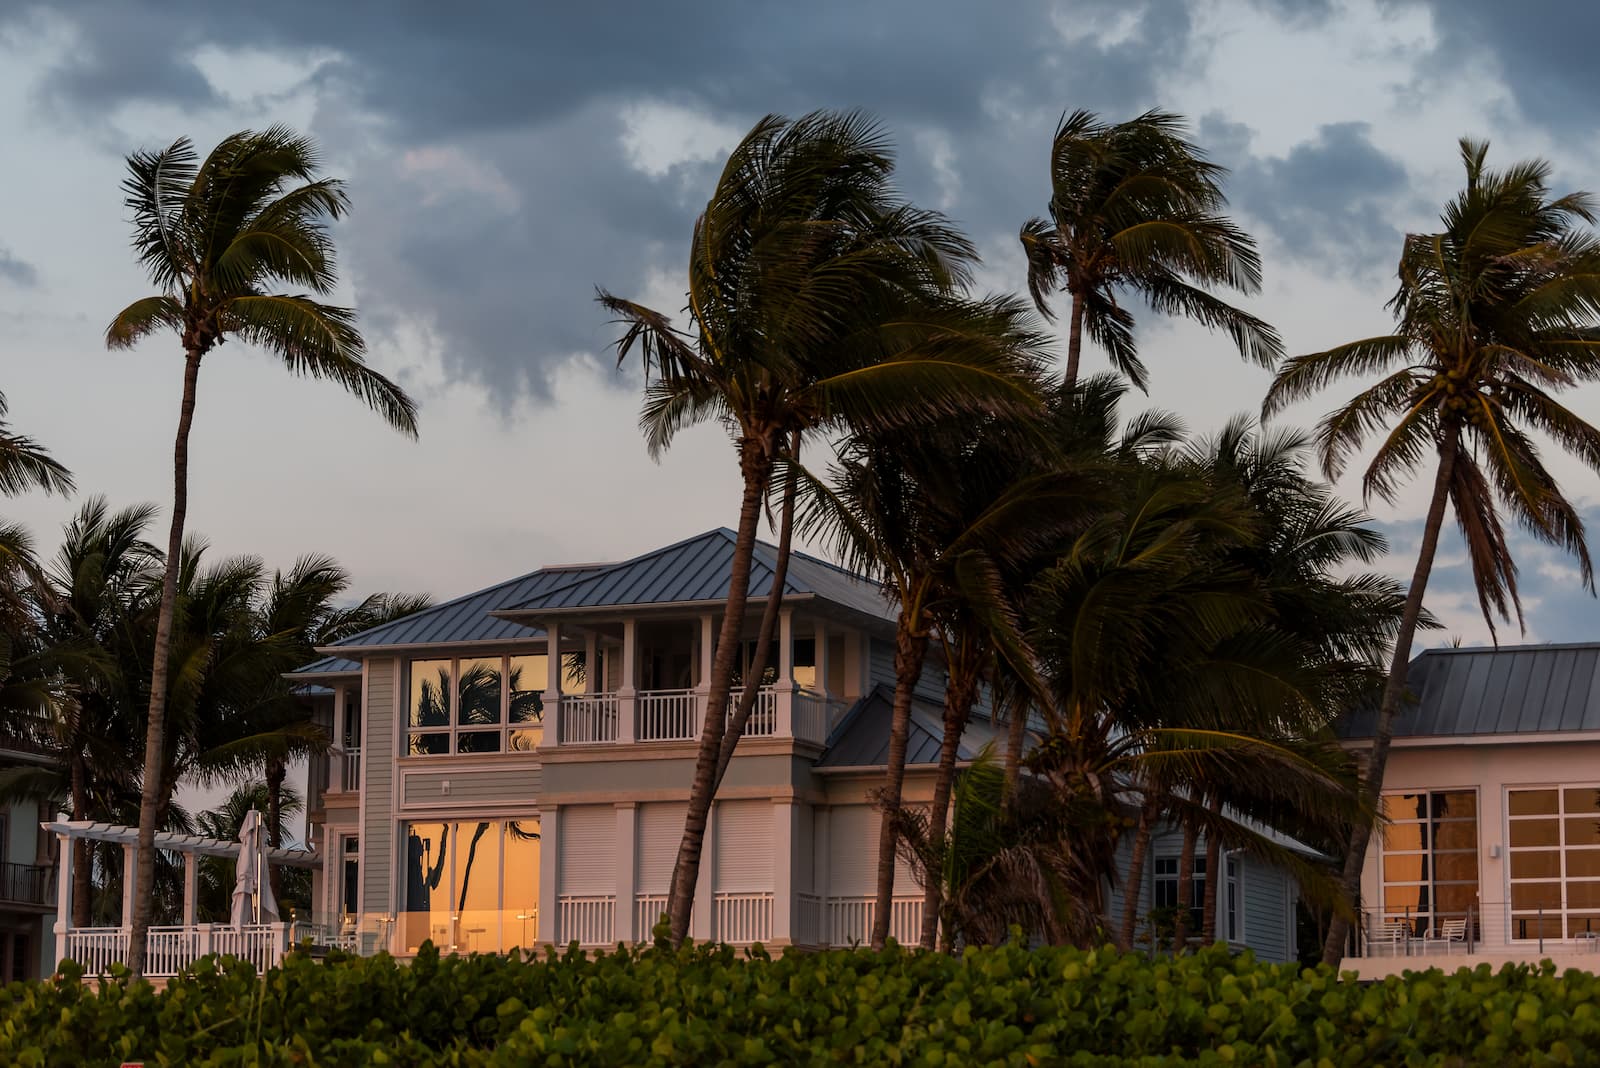 How Quality Storm Shutters Can Ease Hurricane Anxiety in Florida